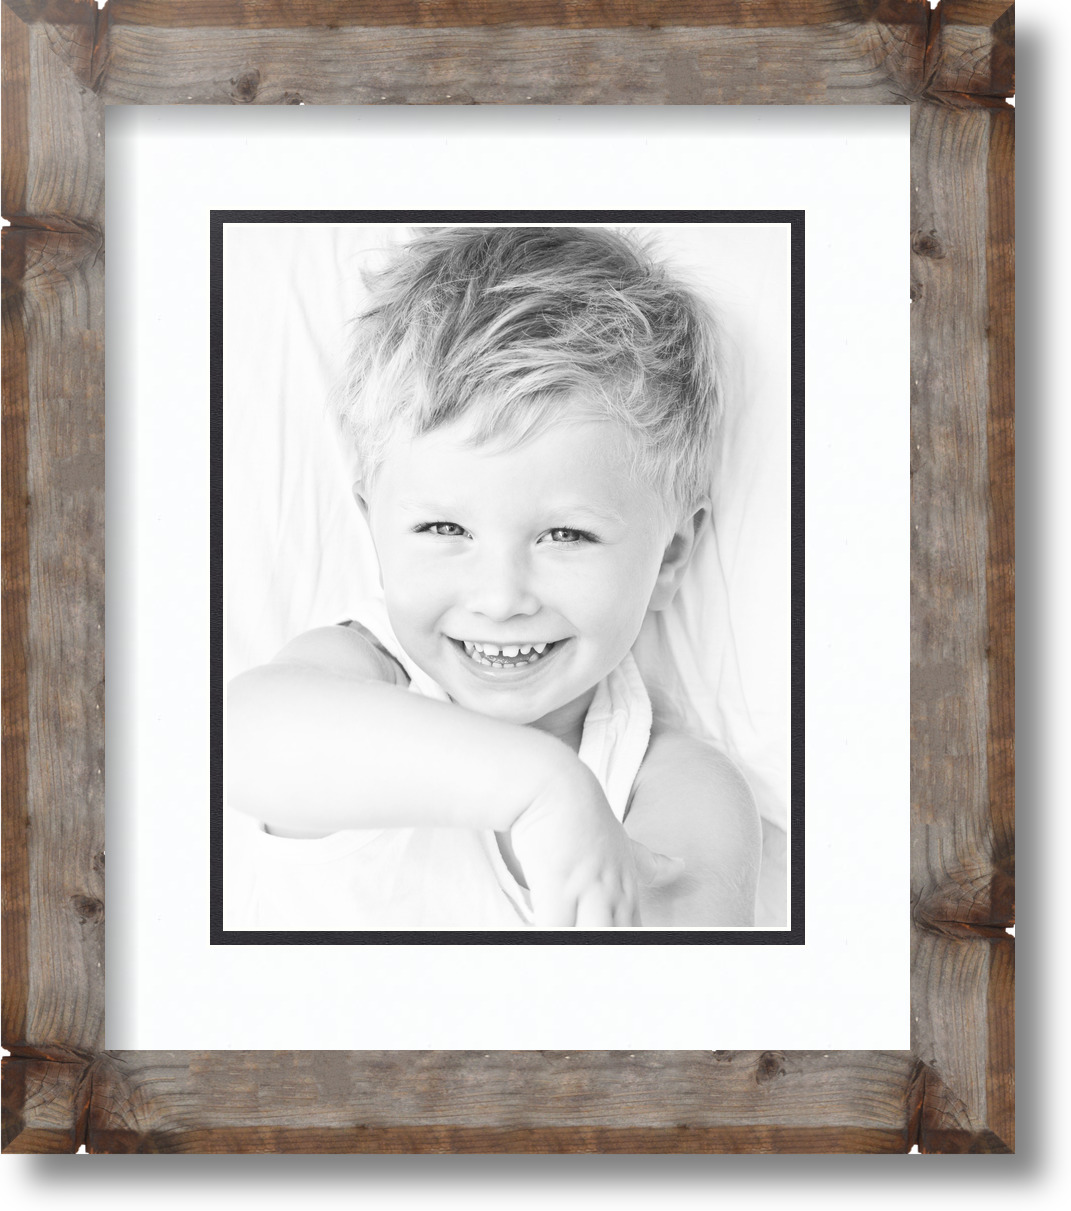 12x12 Opening ArtToFrames Matted 16x16 White Picture Frame with 2" Double Mat